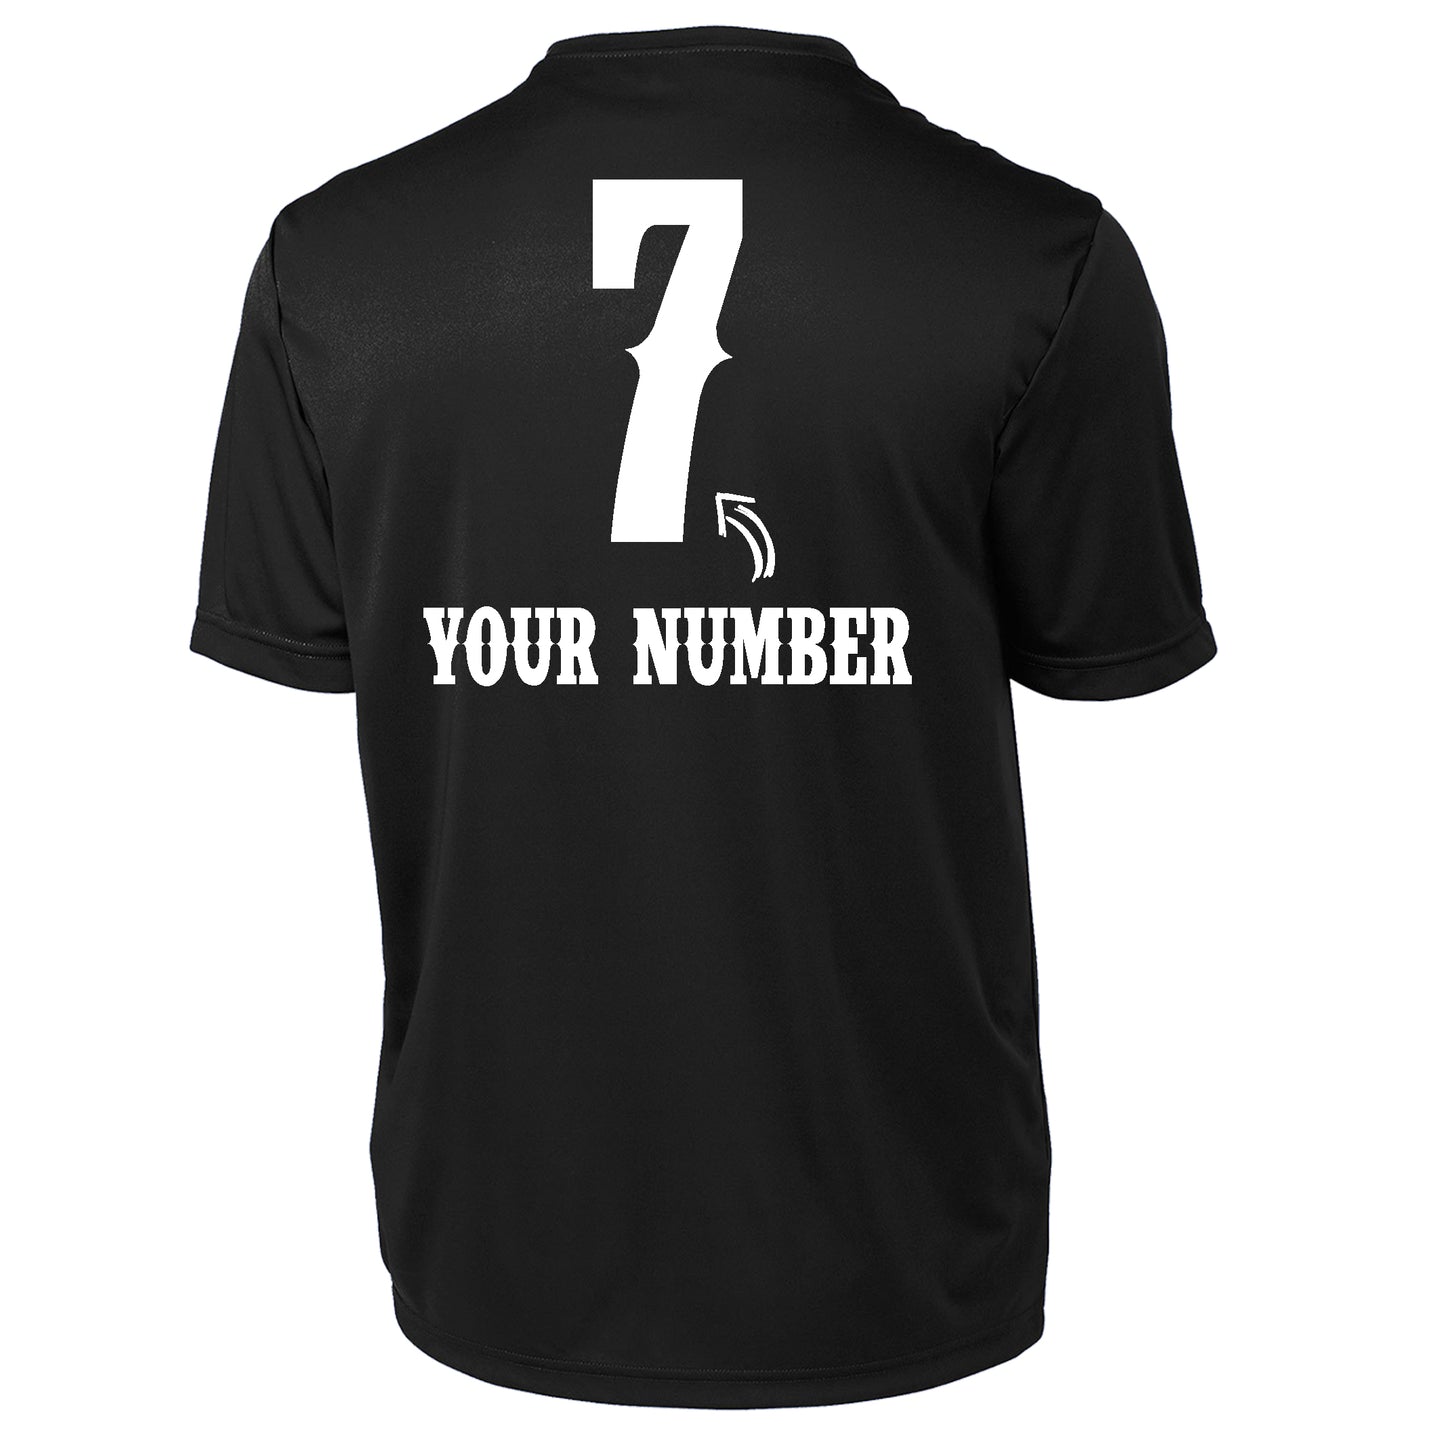 Workout Tee W/ Number